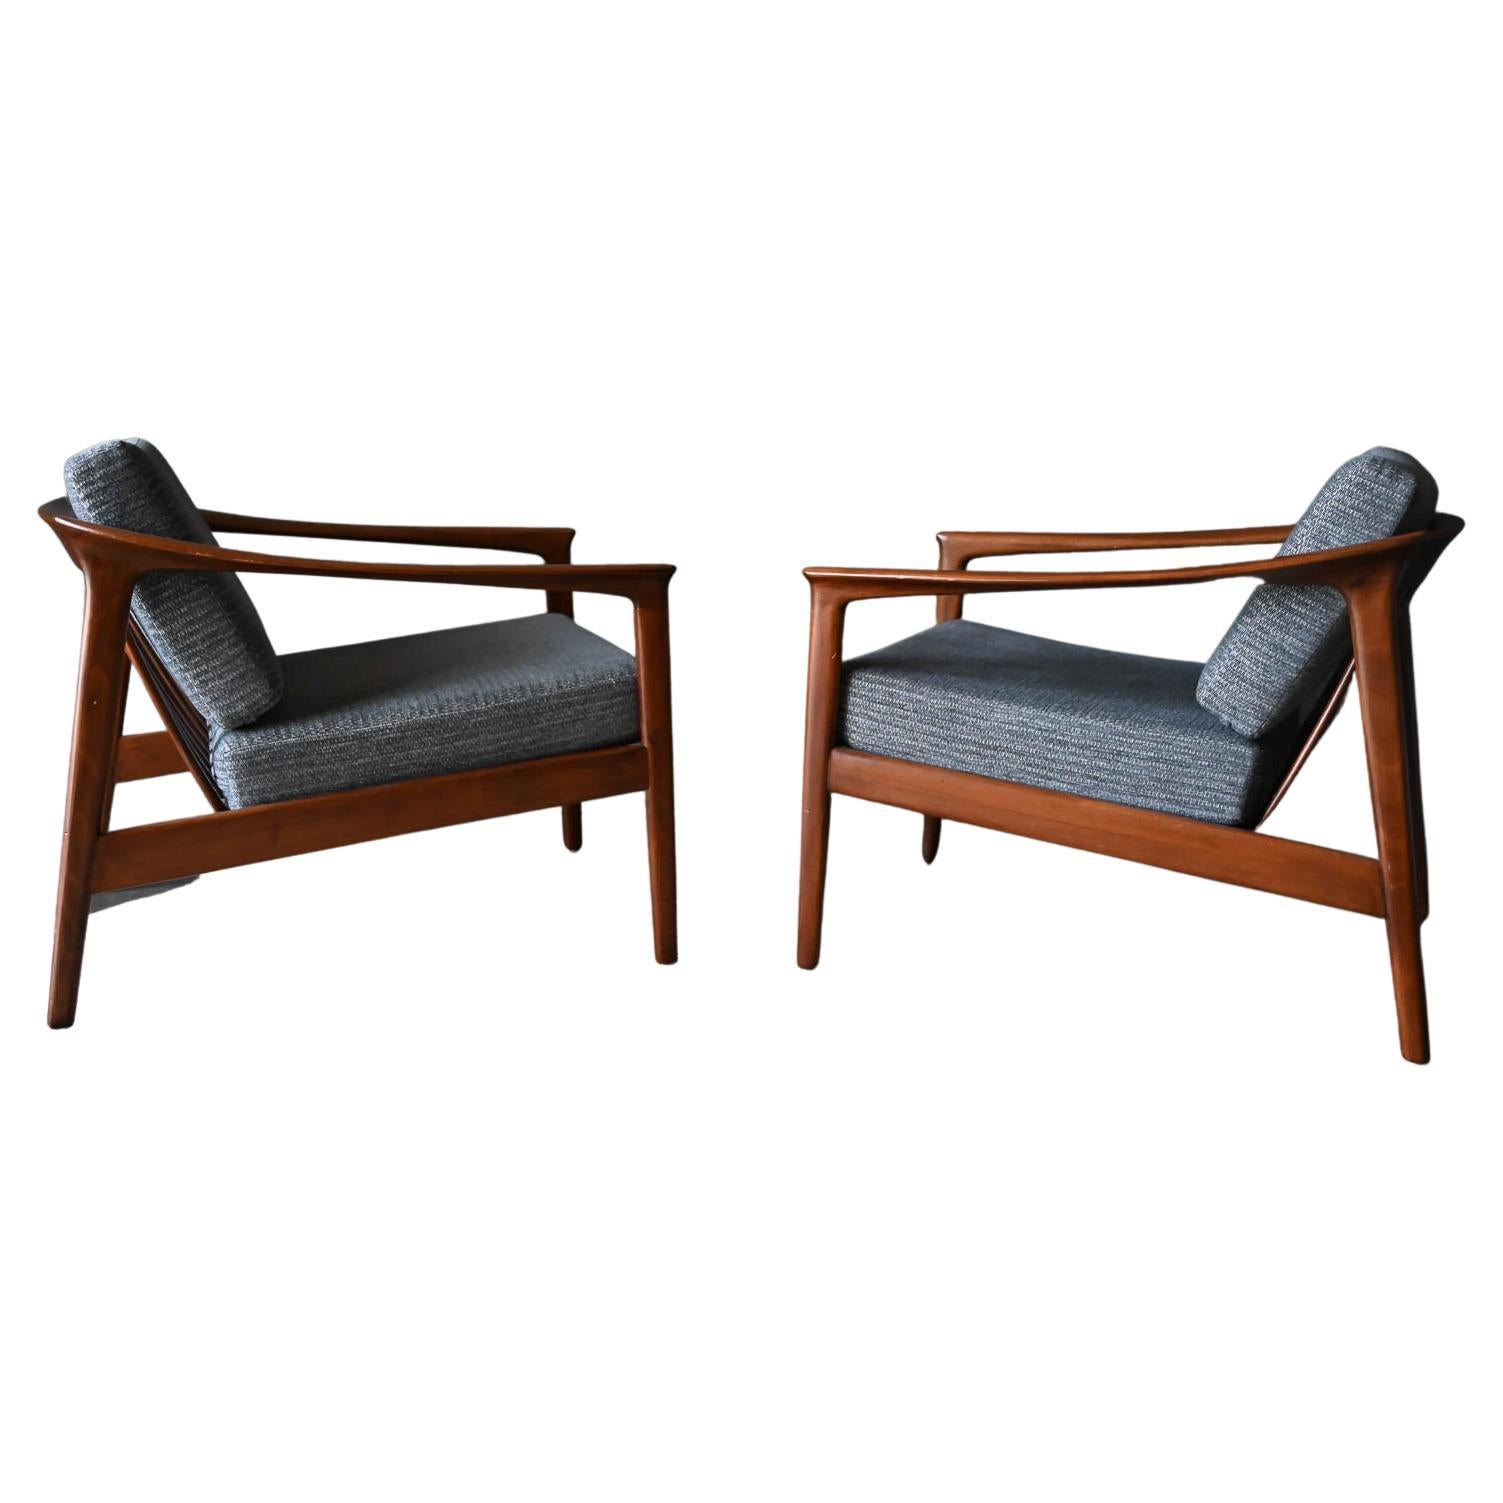 Pair of Folke Ohlsson for Dux Barrel Back Lounge Chairs, ca. 1960